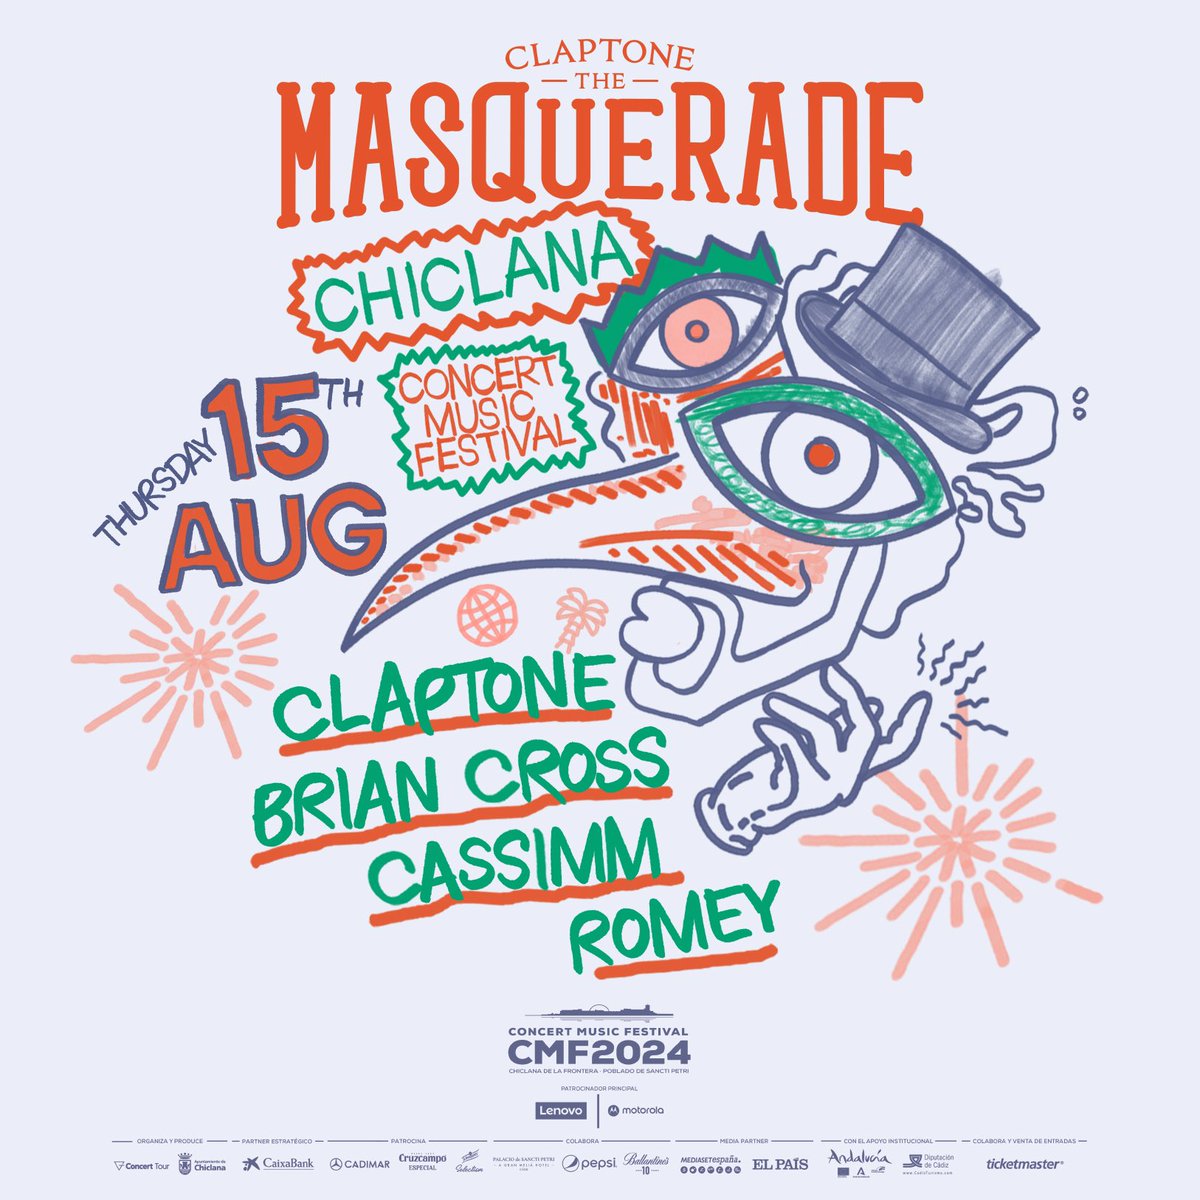 THE MASQUERADE LANDS IN CHICLANA ON AUGUST 15TH FEATURING CLAPTONE ALONGSIDE BRIAN CROSS, CASSIMM & ROMEY 🎩🎉💜 CAN’T WAIT TO SEE YOU ALL THERE!! TICKETS 🎟️ ticketmaster.es/event/39607?su…